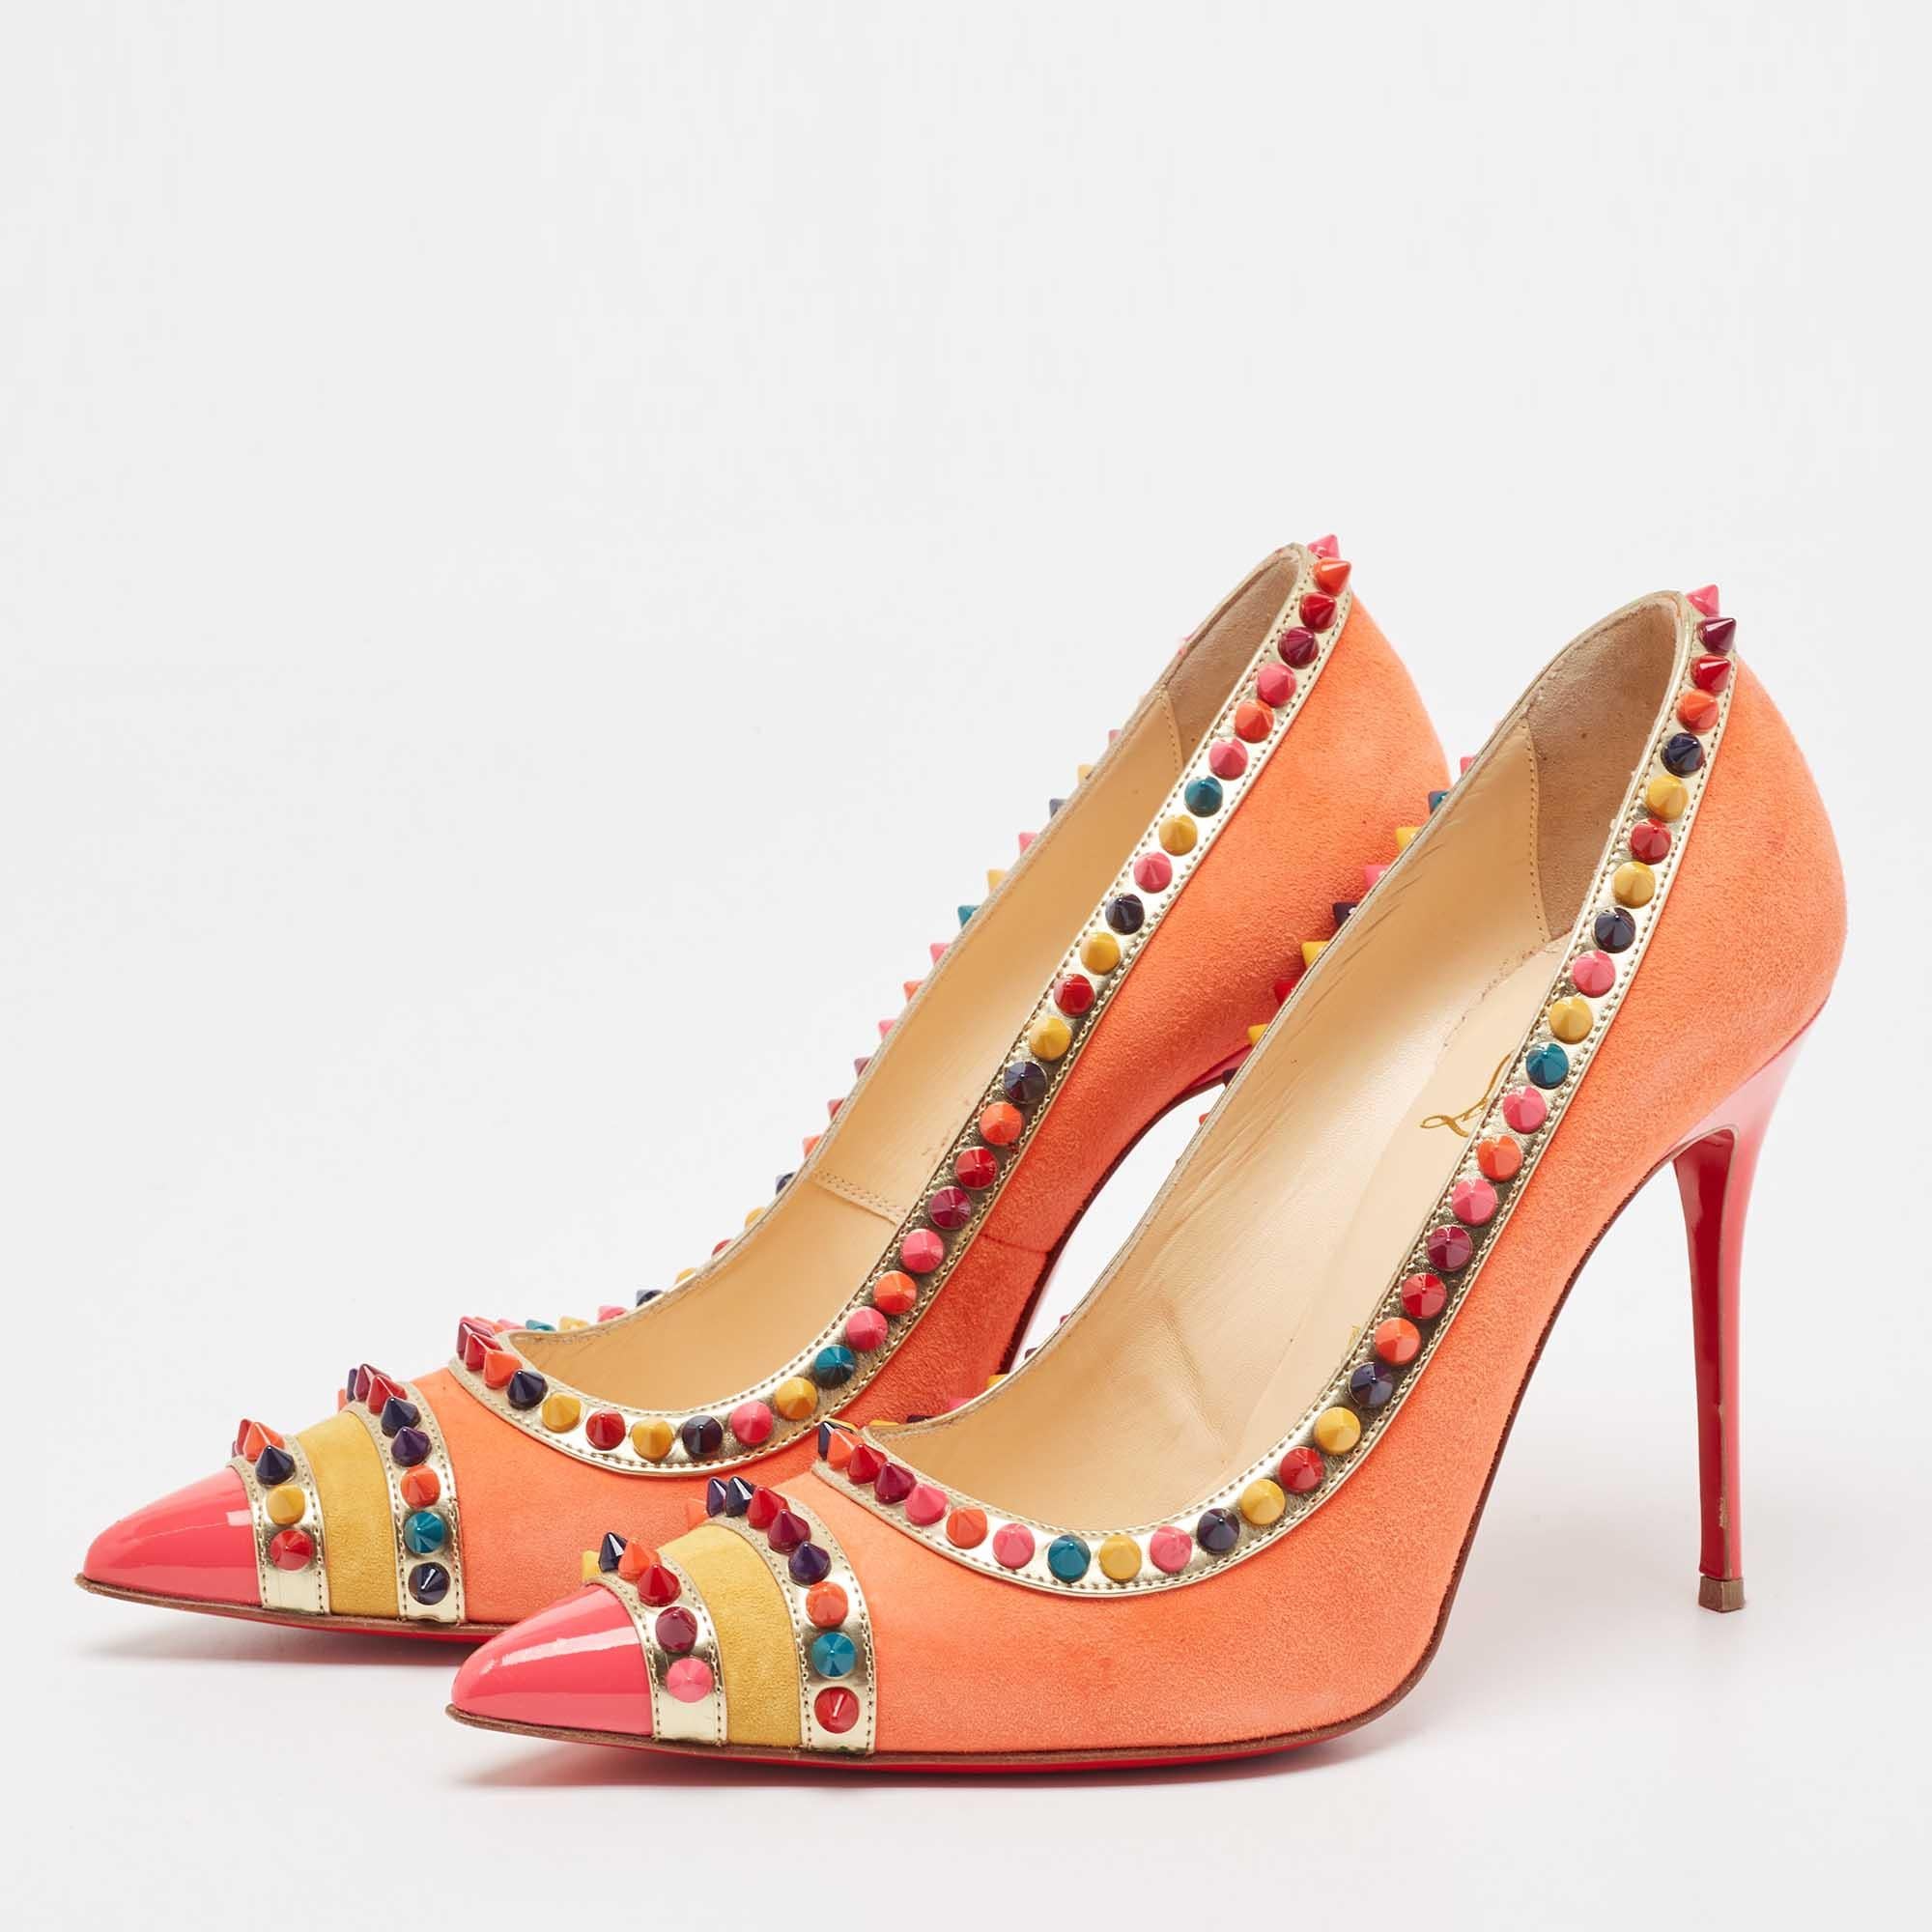 Christian Louboutin Multicolor Suede and Leather Malabar Hill Pumps Size 39 1